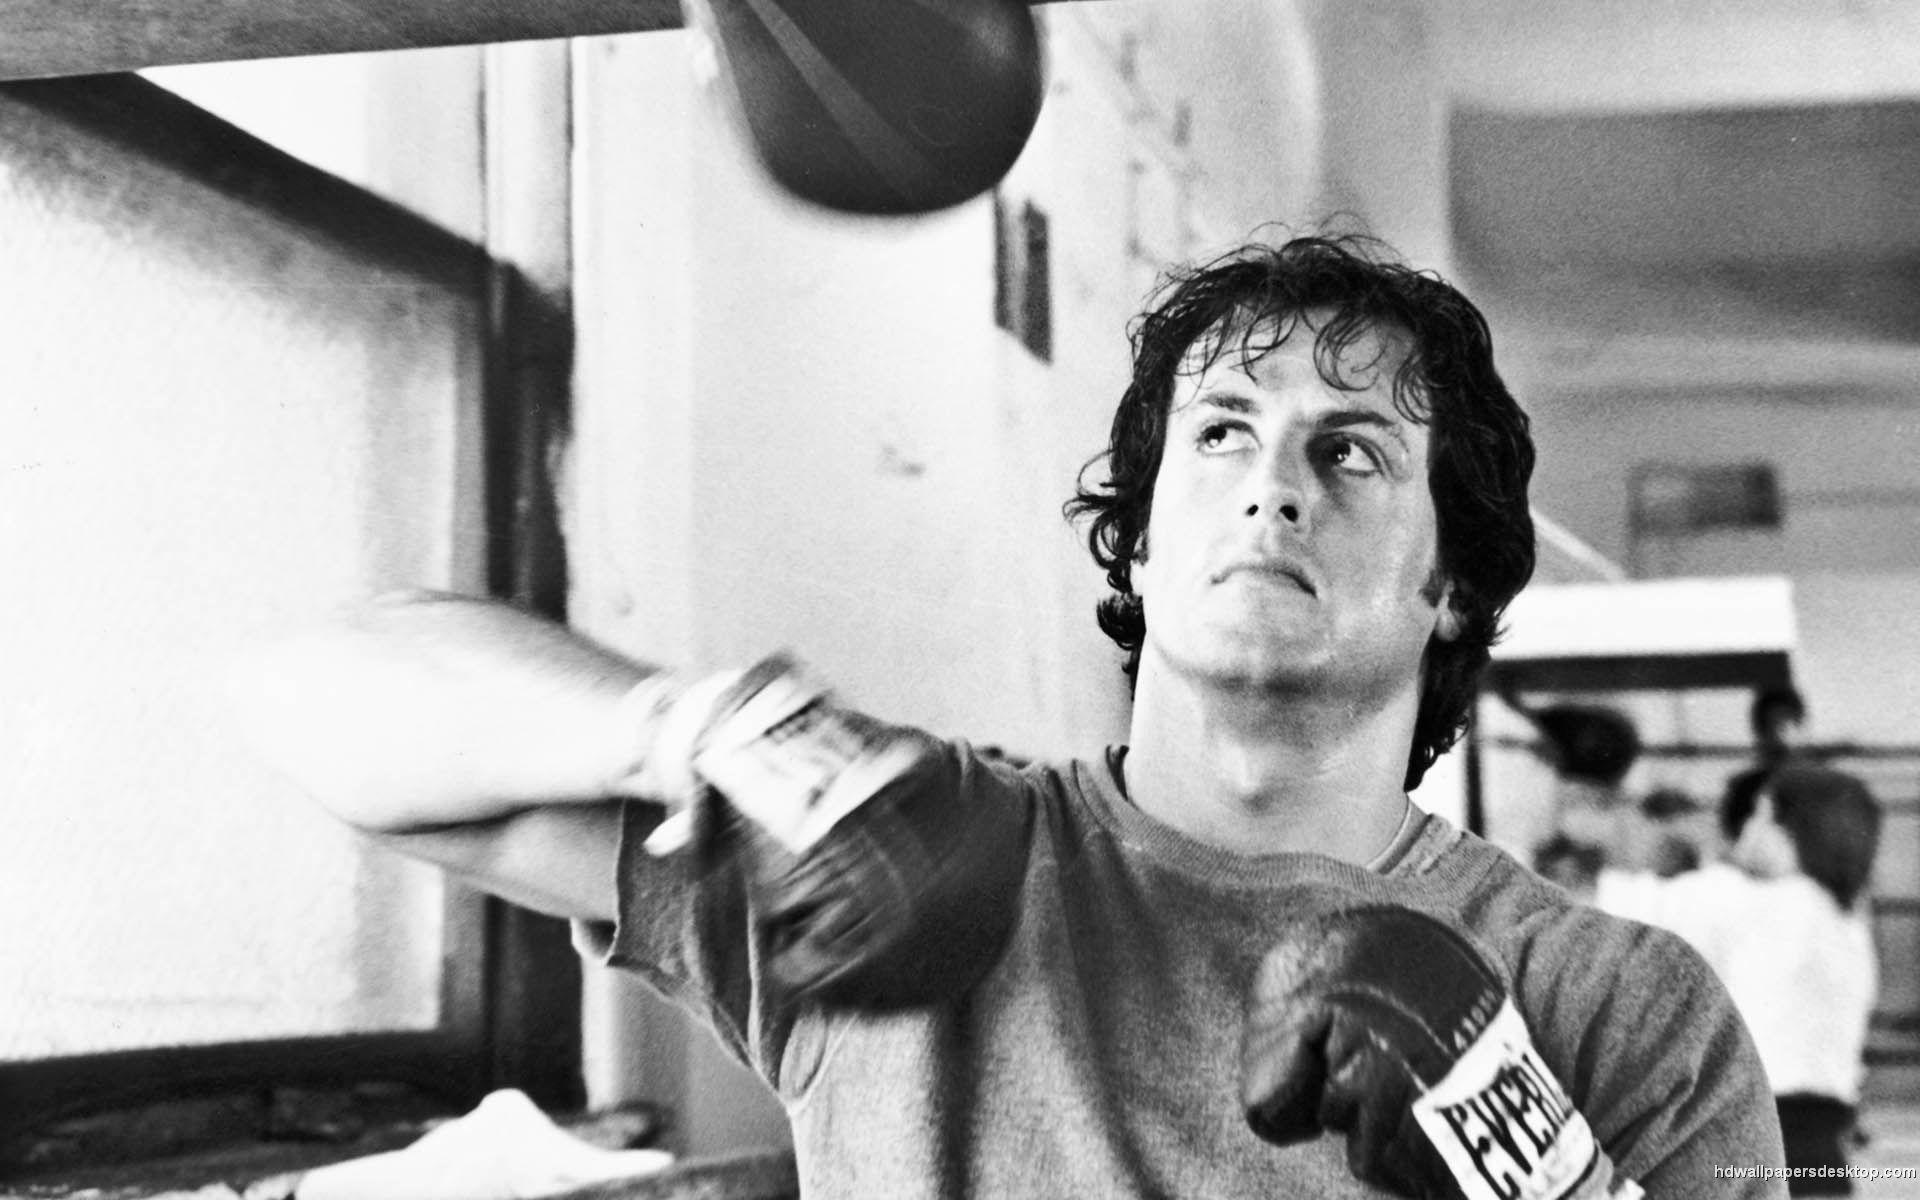 Work Out Like Rocky Balboa at these Philadelphia Locations